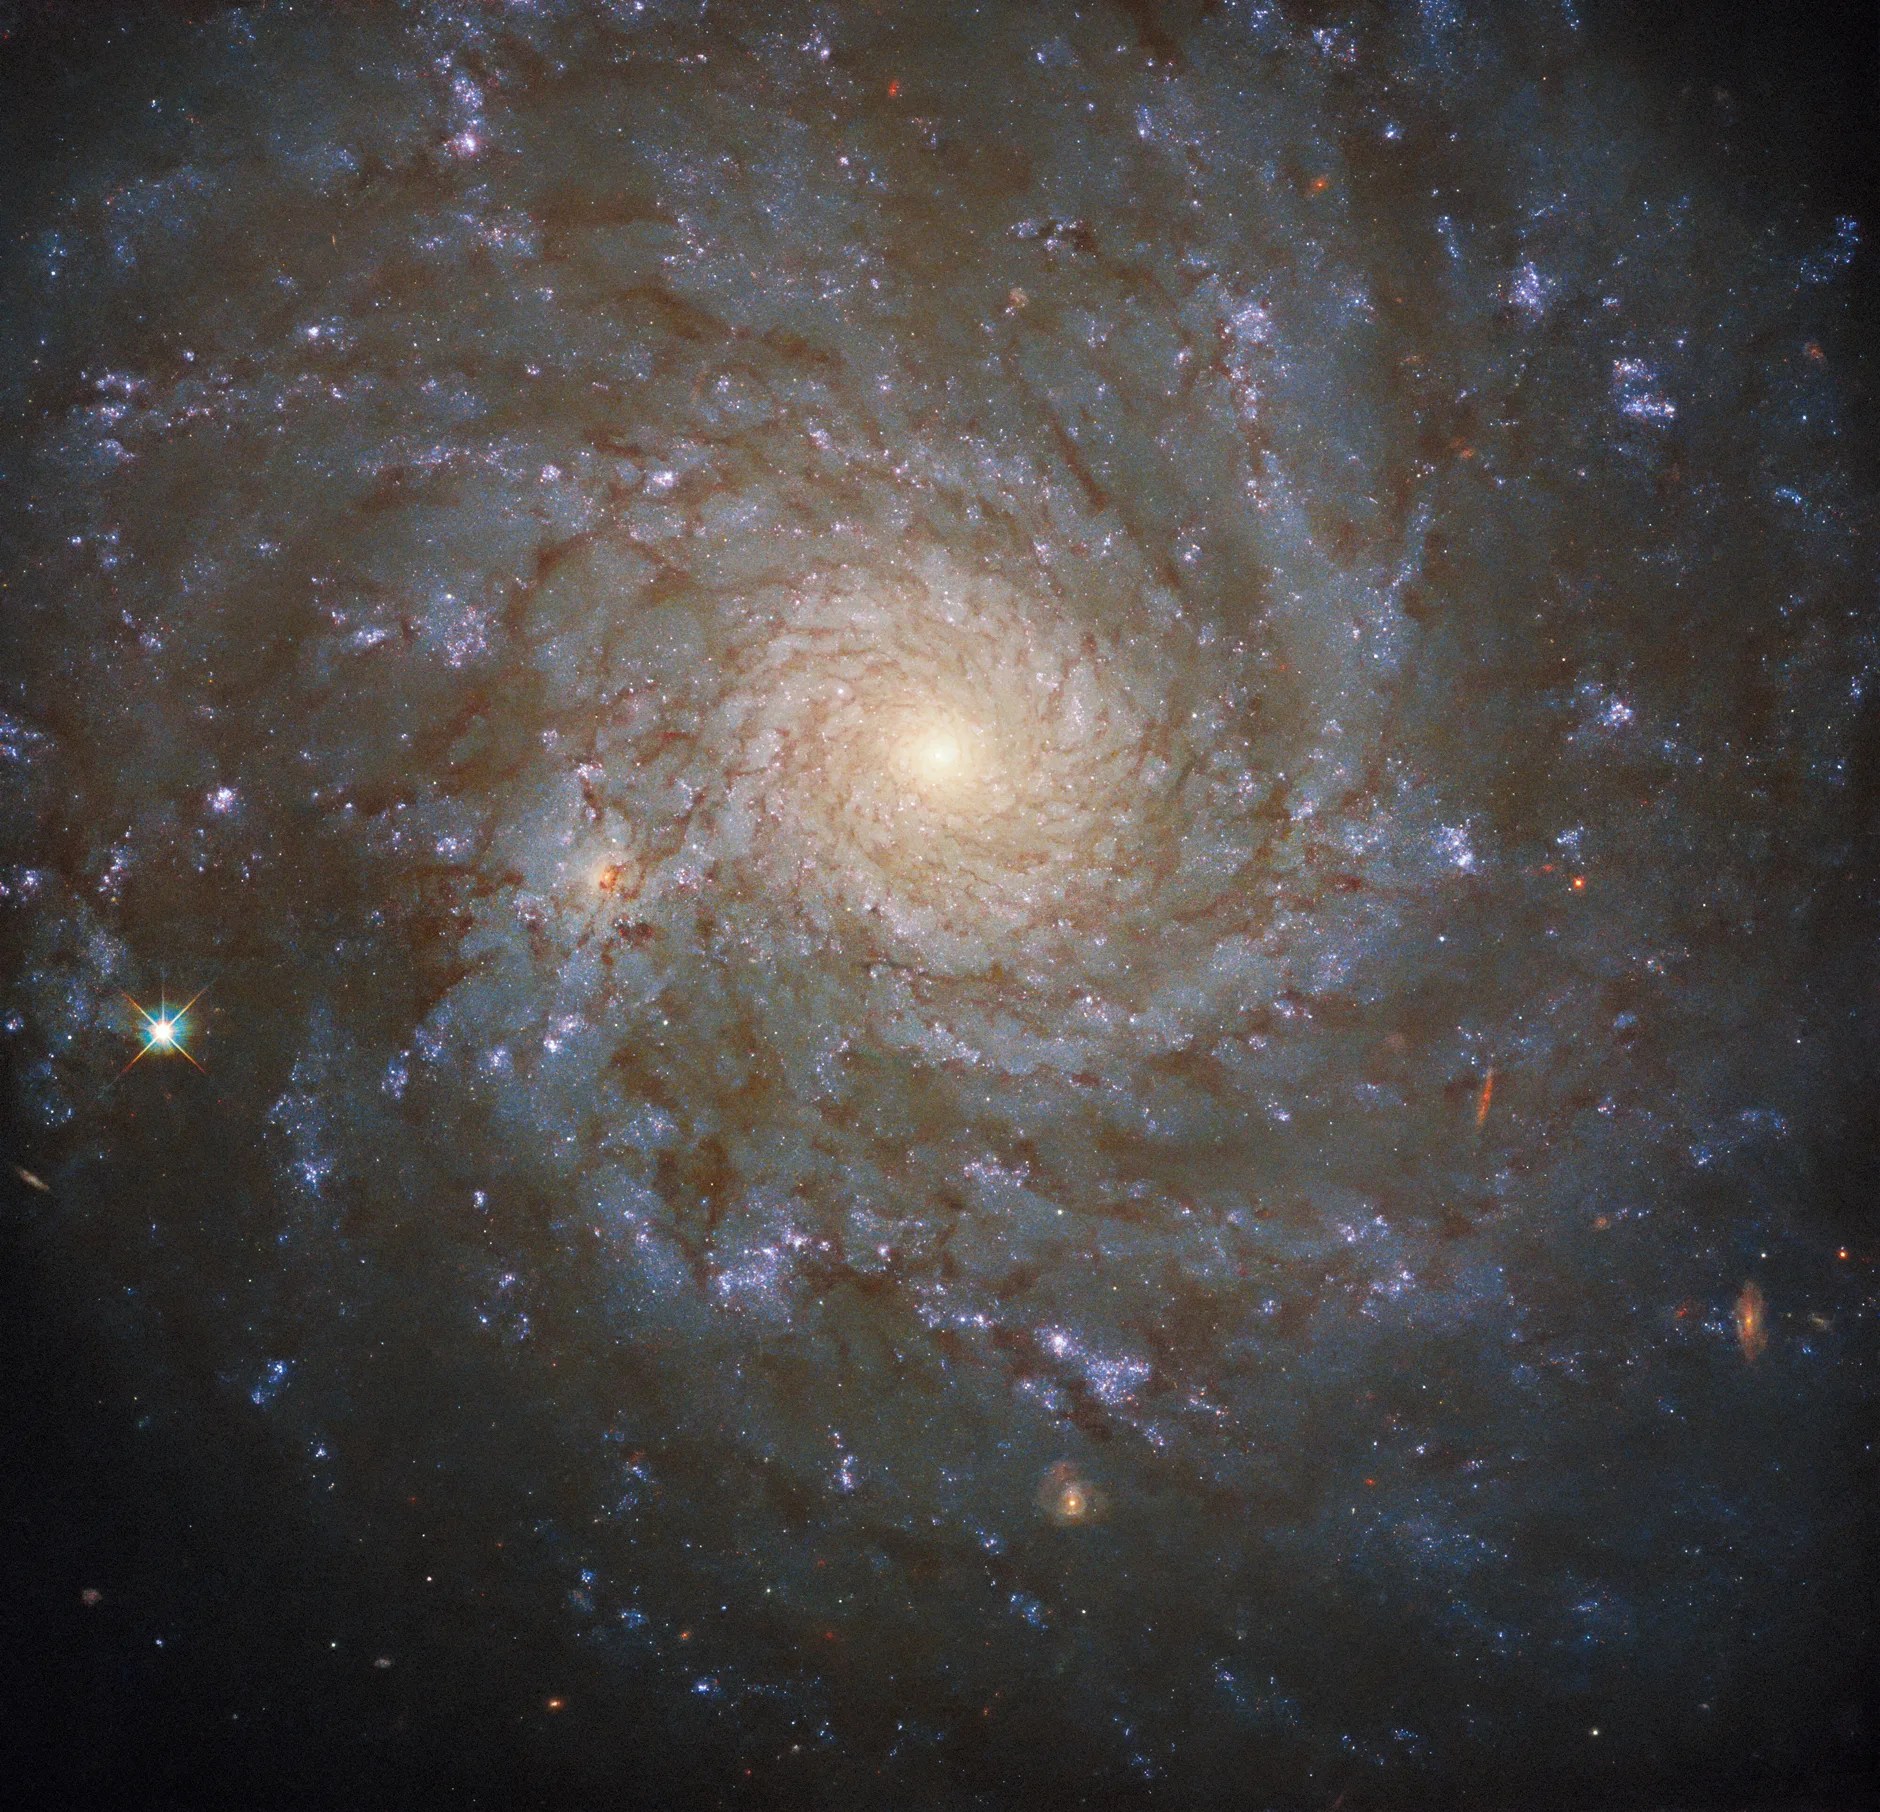 A bright spiral galaxy with a large, luminous core.